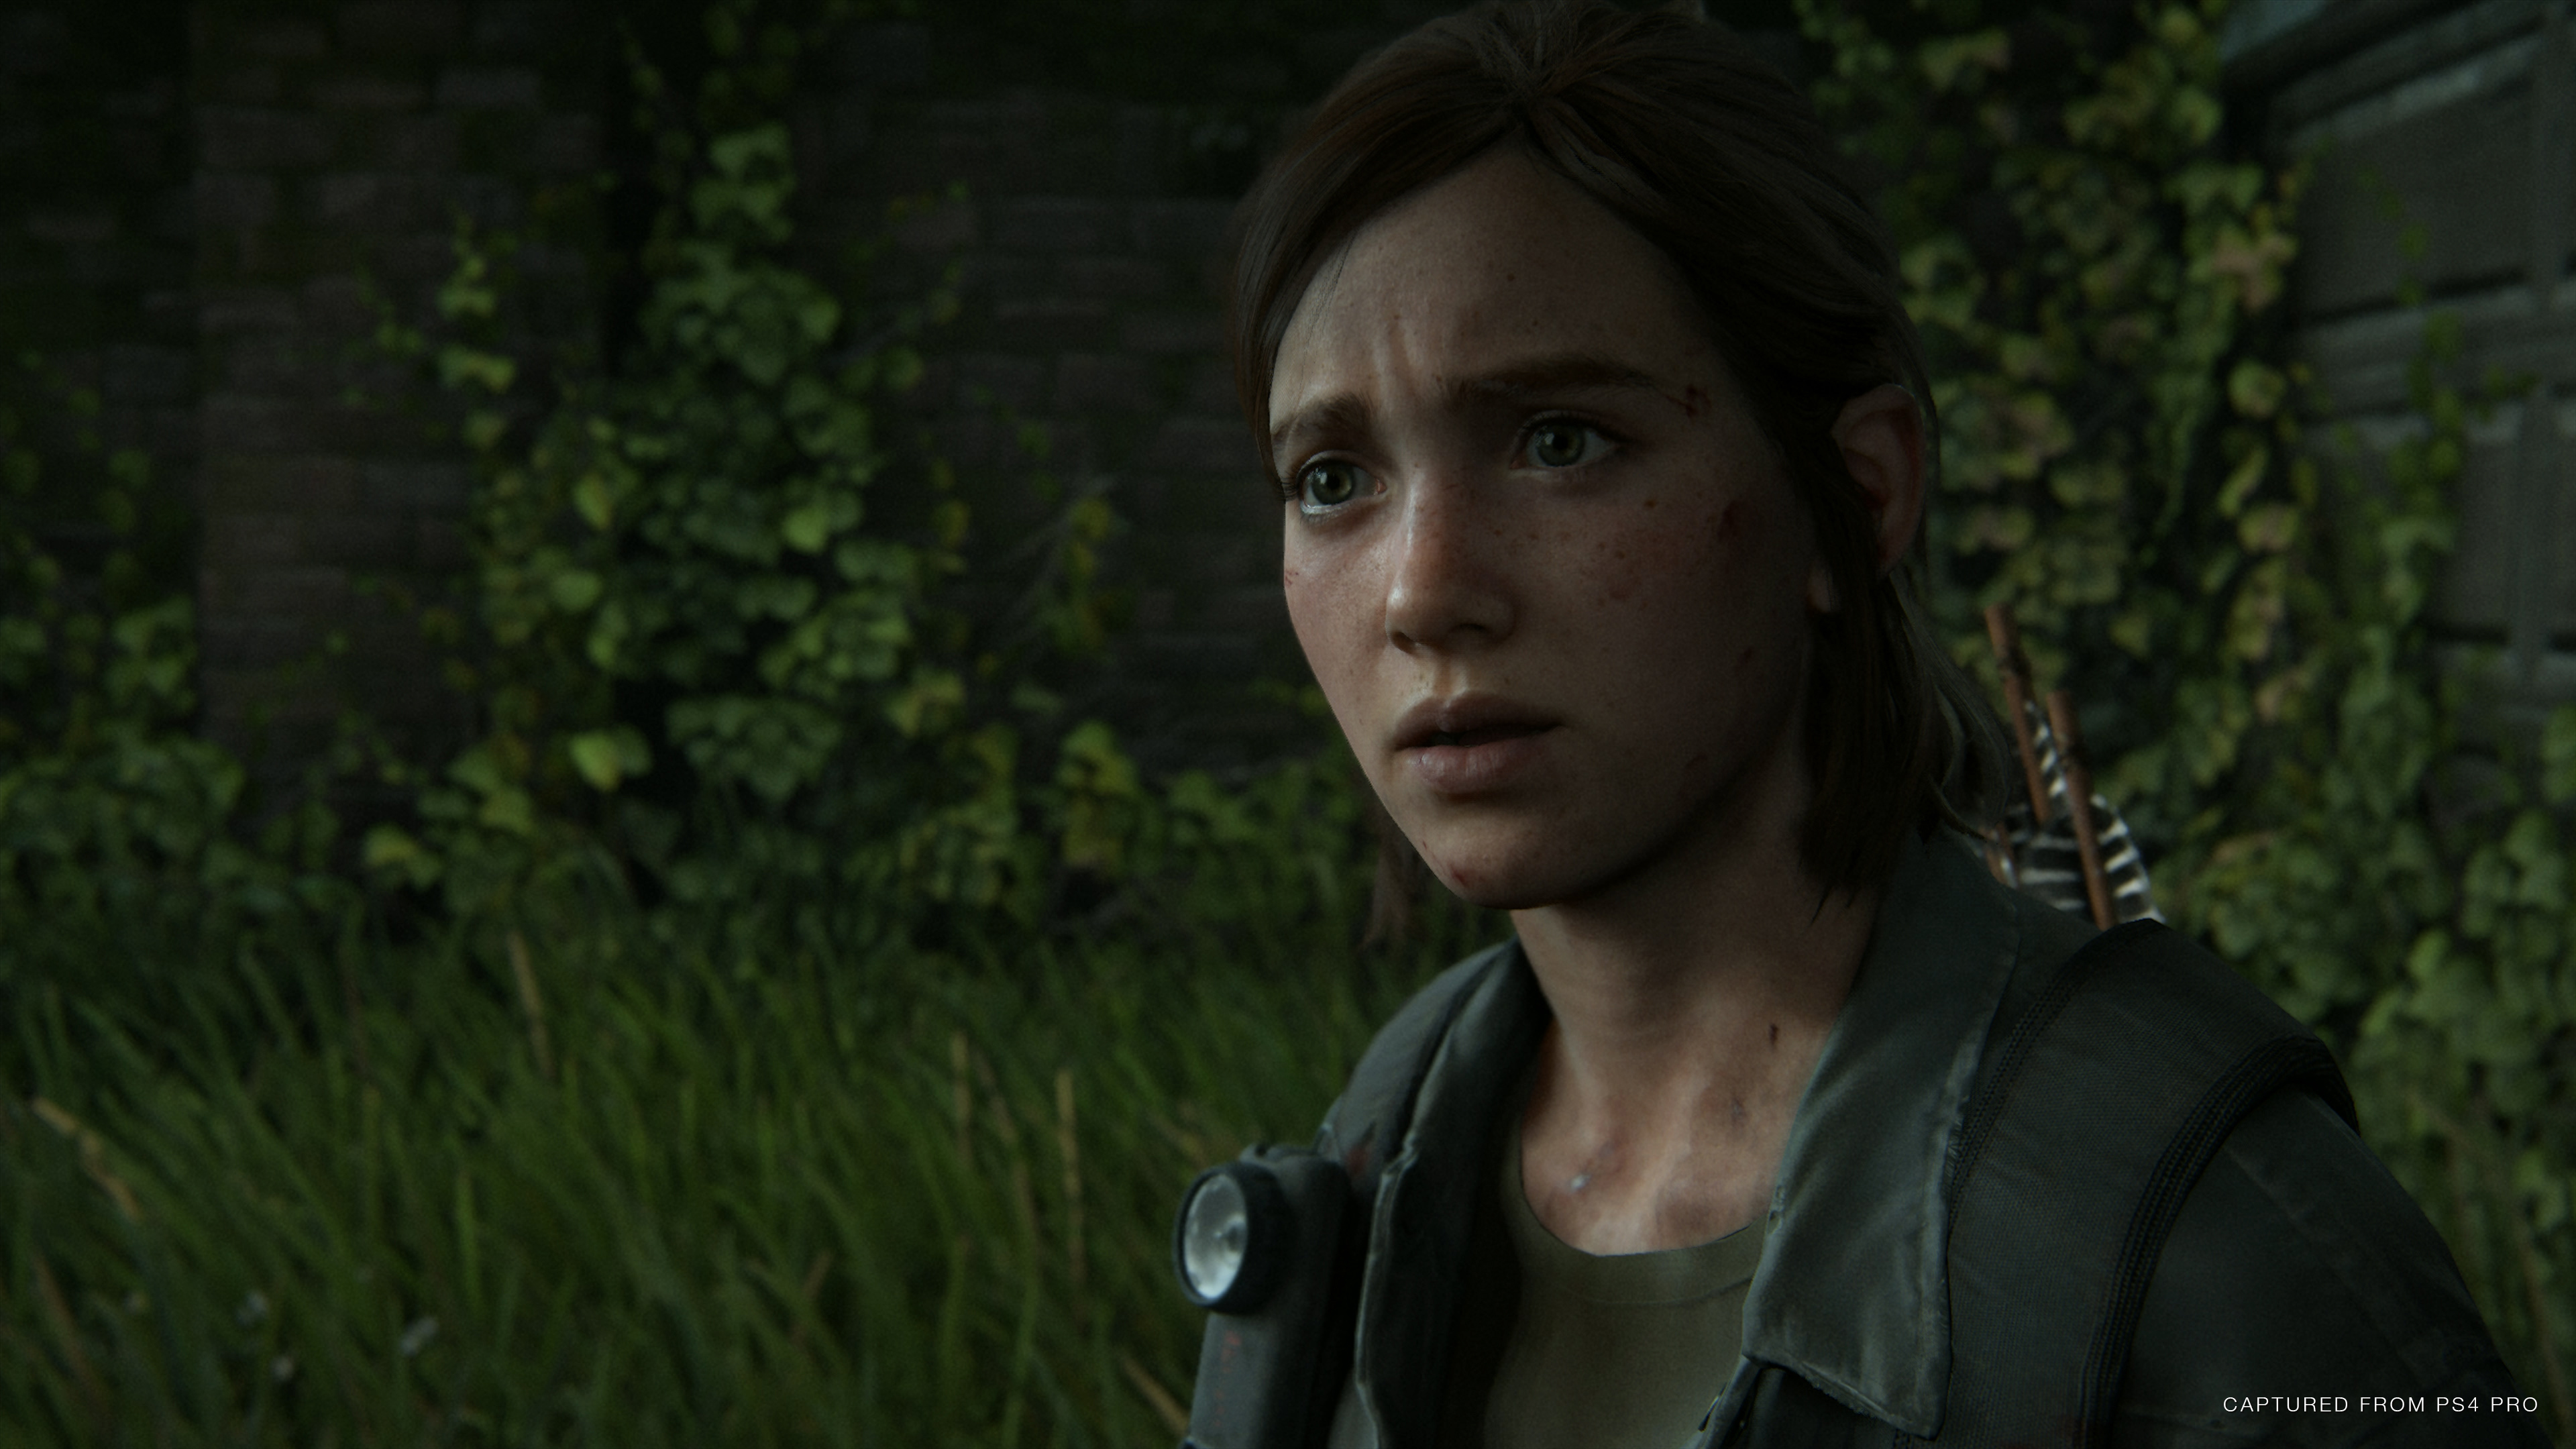 Review: Last of Us